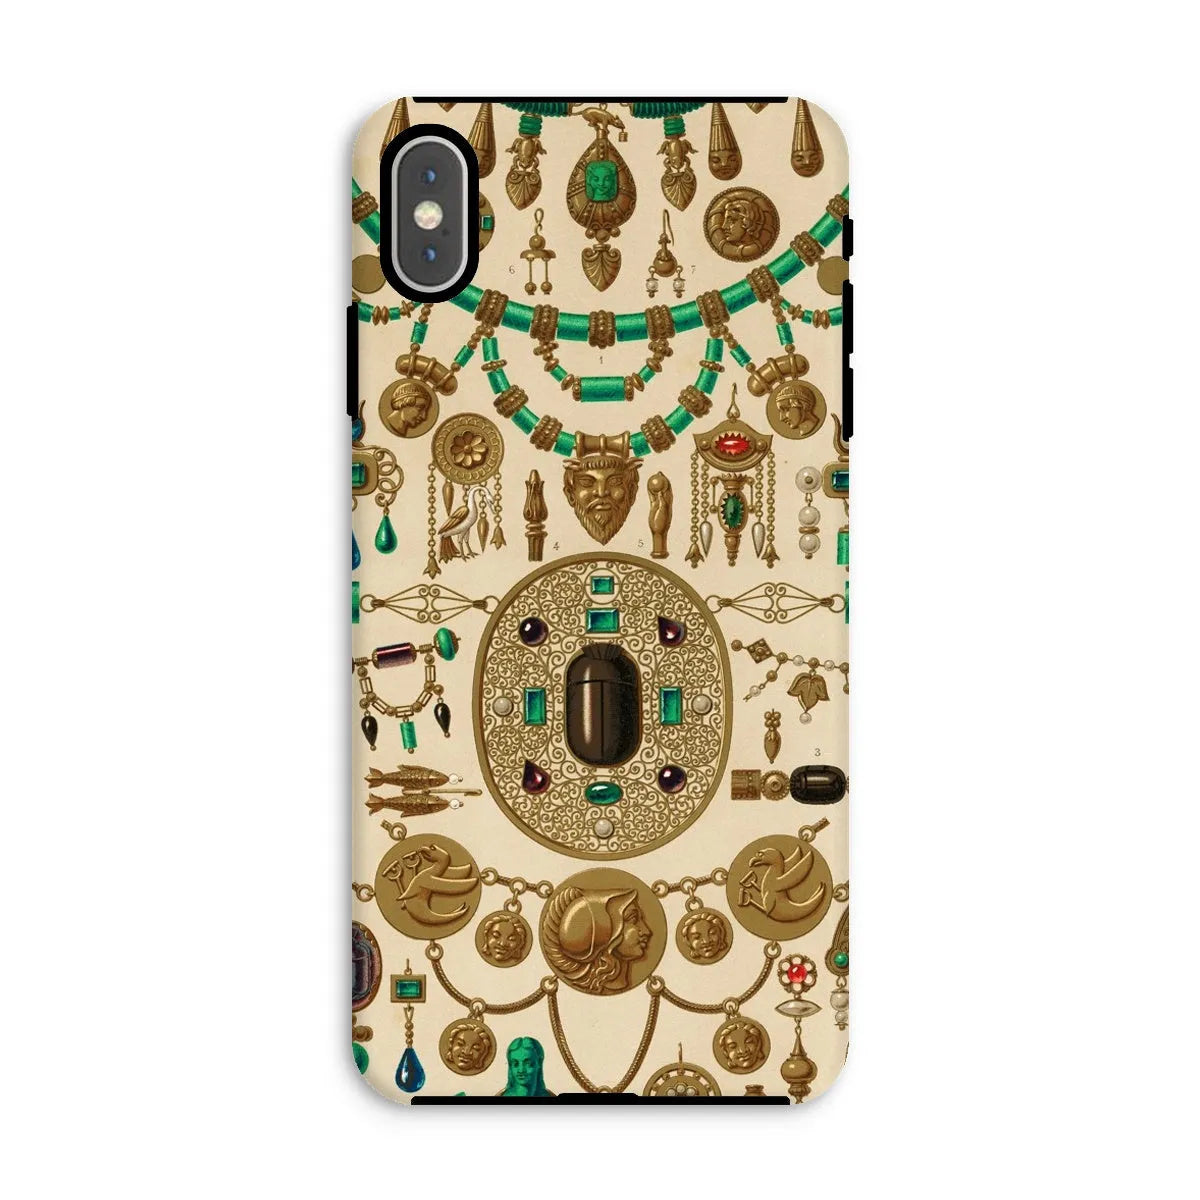 Etruscan Jewelry By Auguste Racinet Art Phone Case - Iphone Xs Max / Matte - Mobile Phone Cases - Aesthetic Art